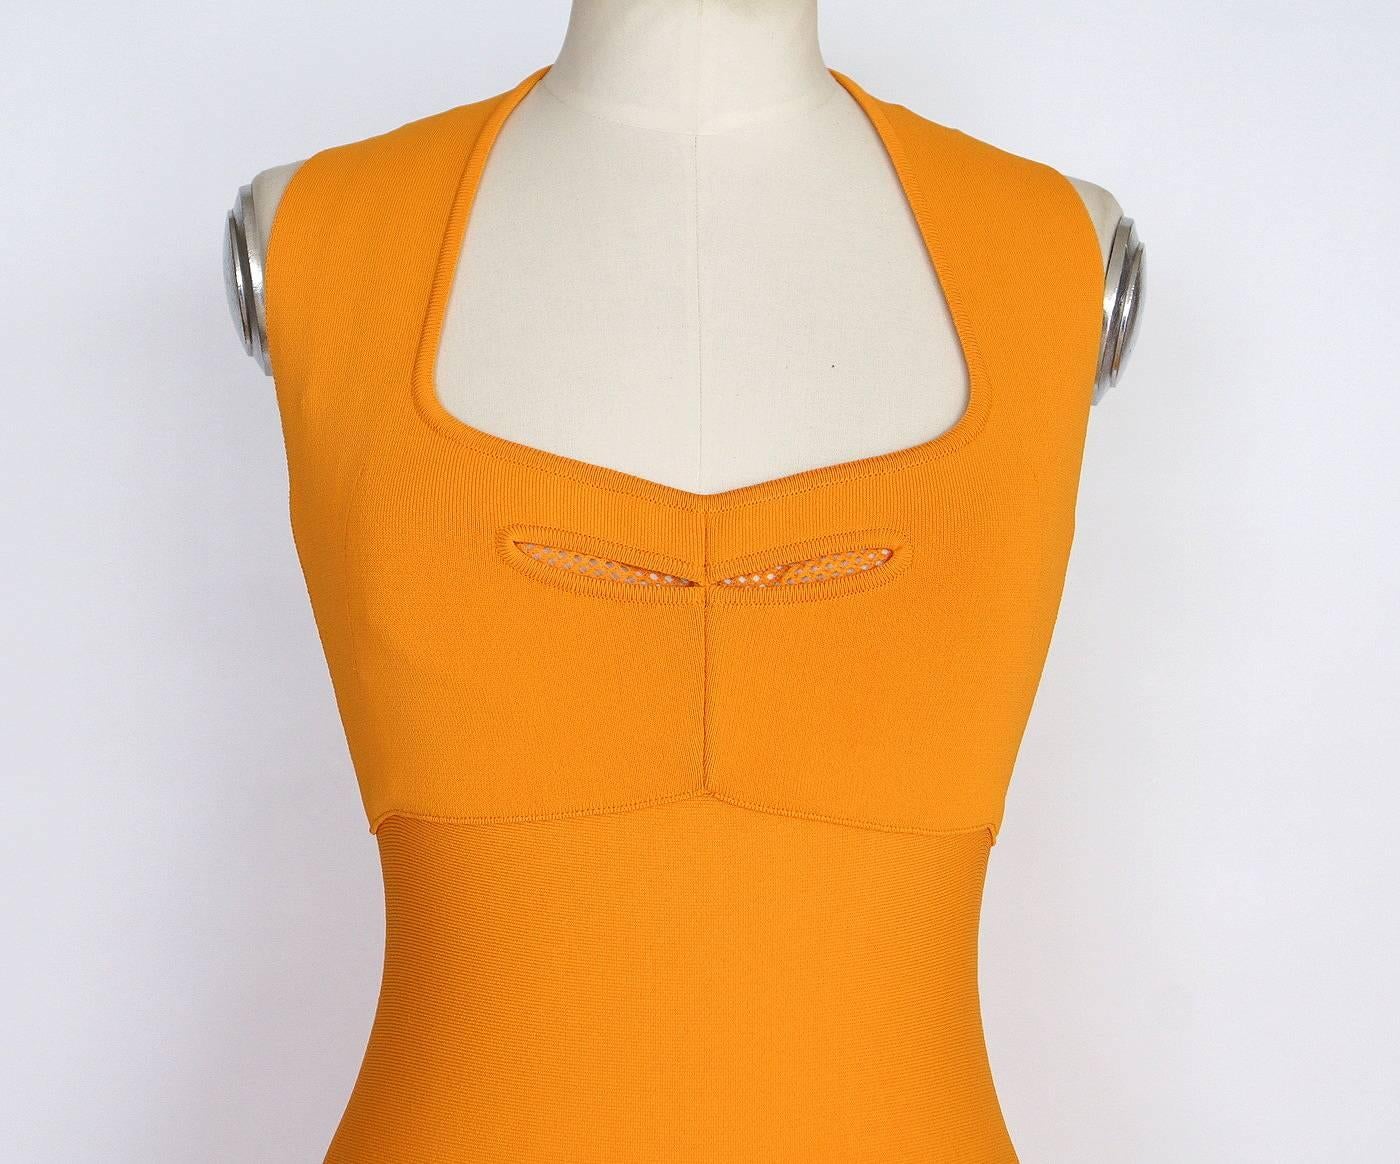 Guaranteed authentic ROLAND MOURET beautifully styled butterscotch dress 
with exceptional style and cut.
Beautifully shaped squared neckline in front with scuba net peek a boo.
Stitching detail under bust line.
Bold rear zipper runs the length of